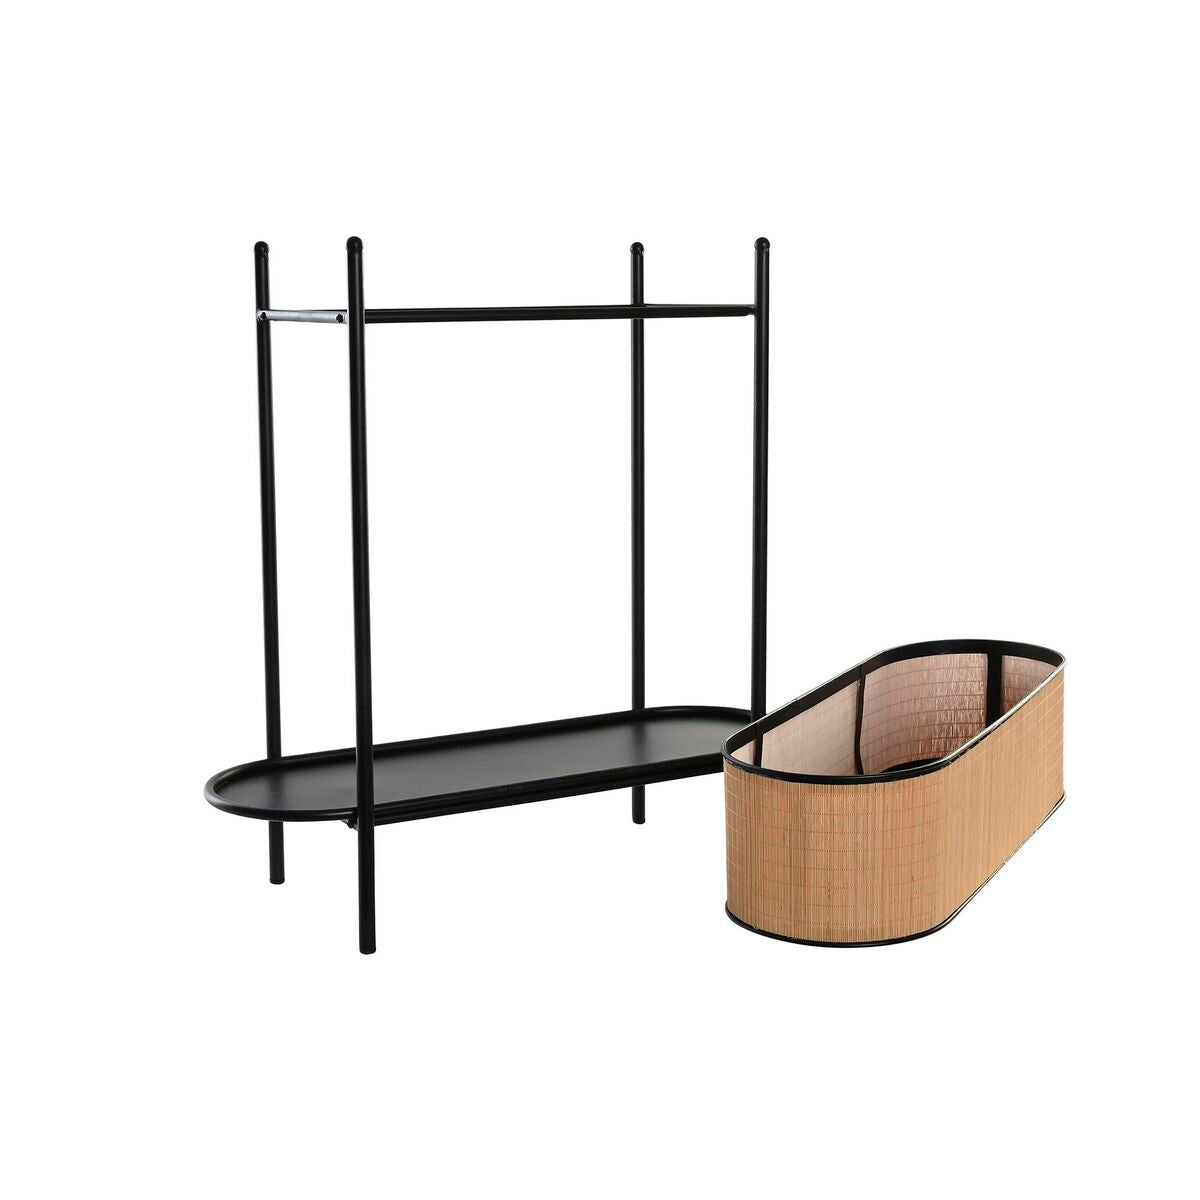 Planter in Bamboo and Black Metal (60 x 23.5 x 69 cm)